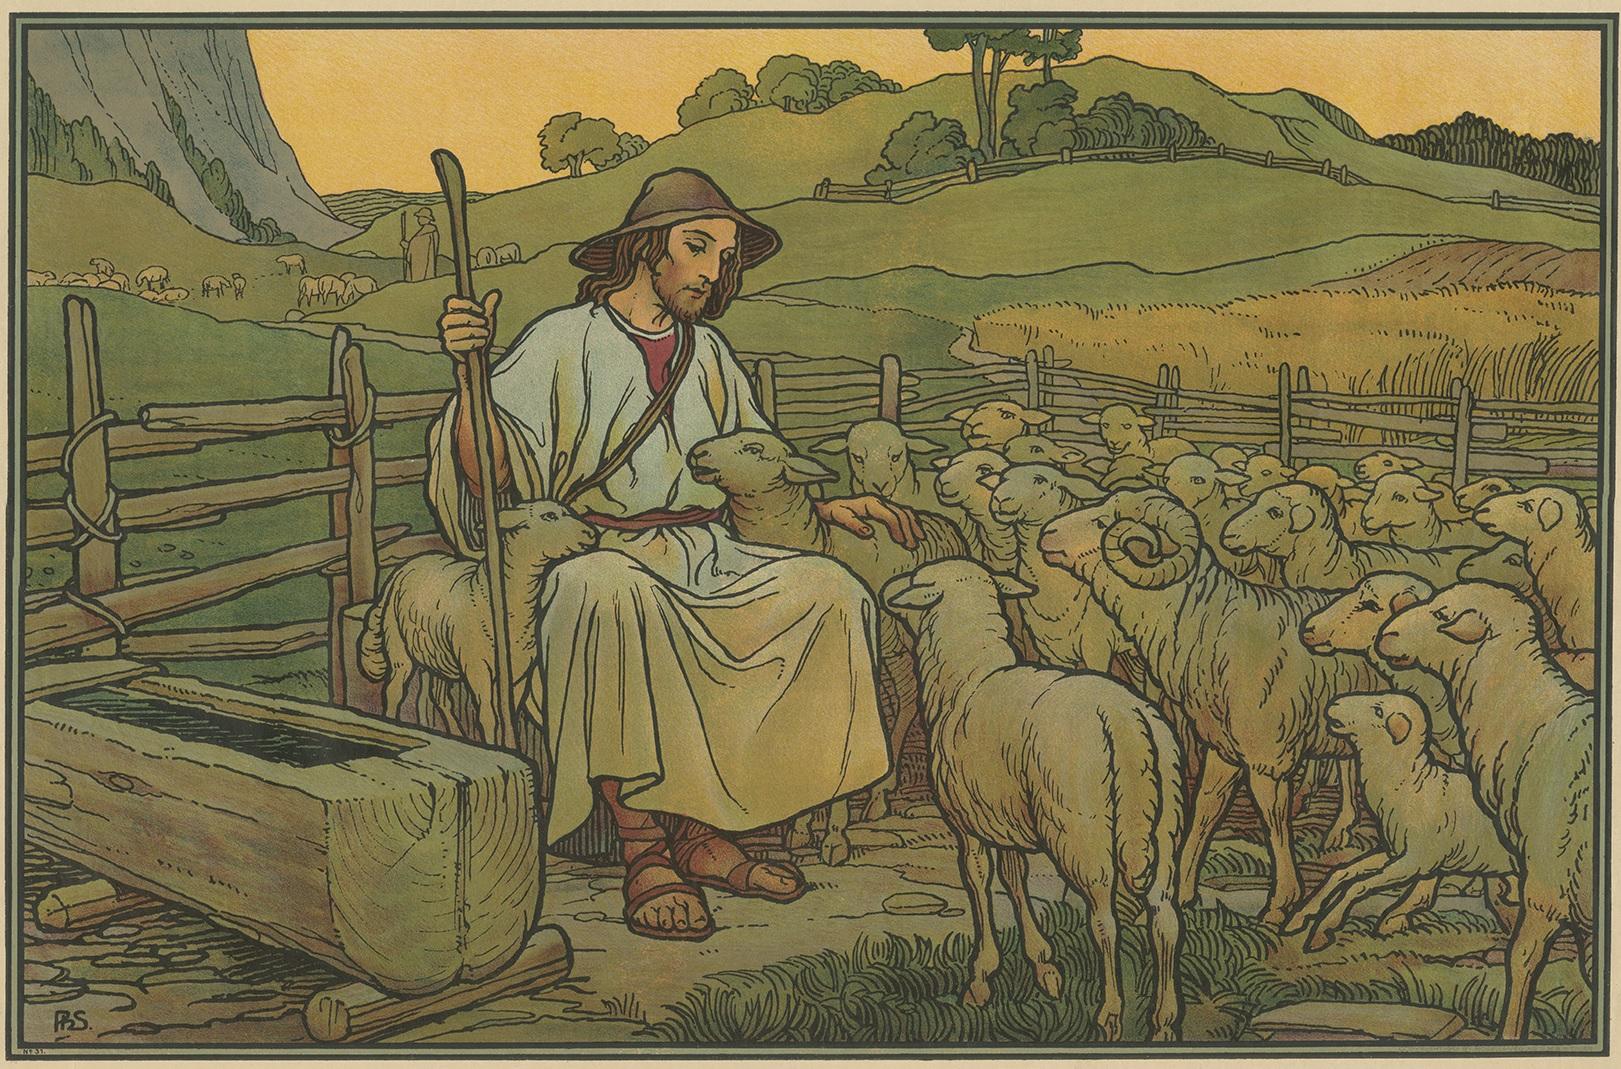 Large antique print of the Good Shepherd. Published by Mosella-Verlag, 1913. This print originates from a series titled 'Kathol. Schulbibelwerk von Dr. Ecker'.